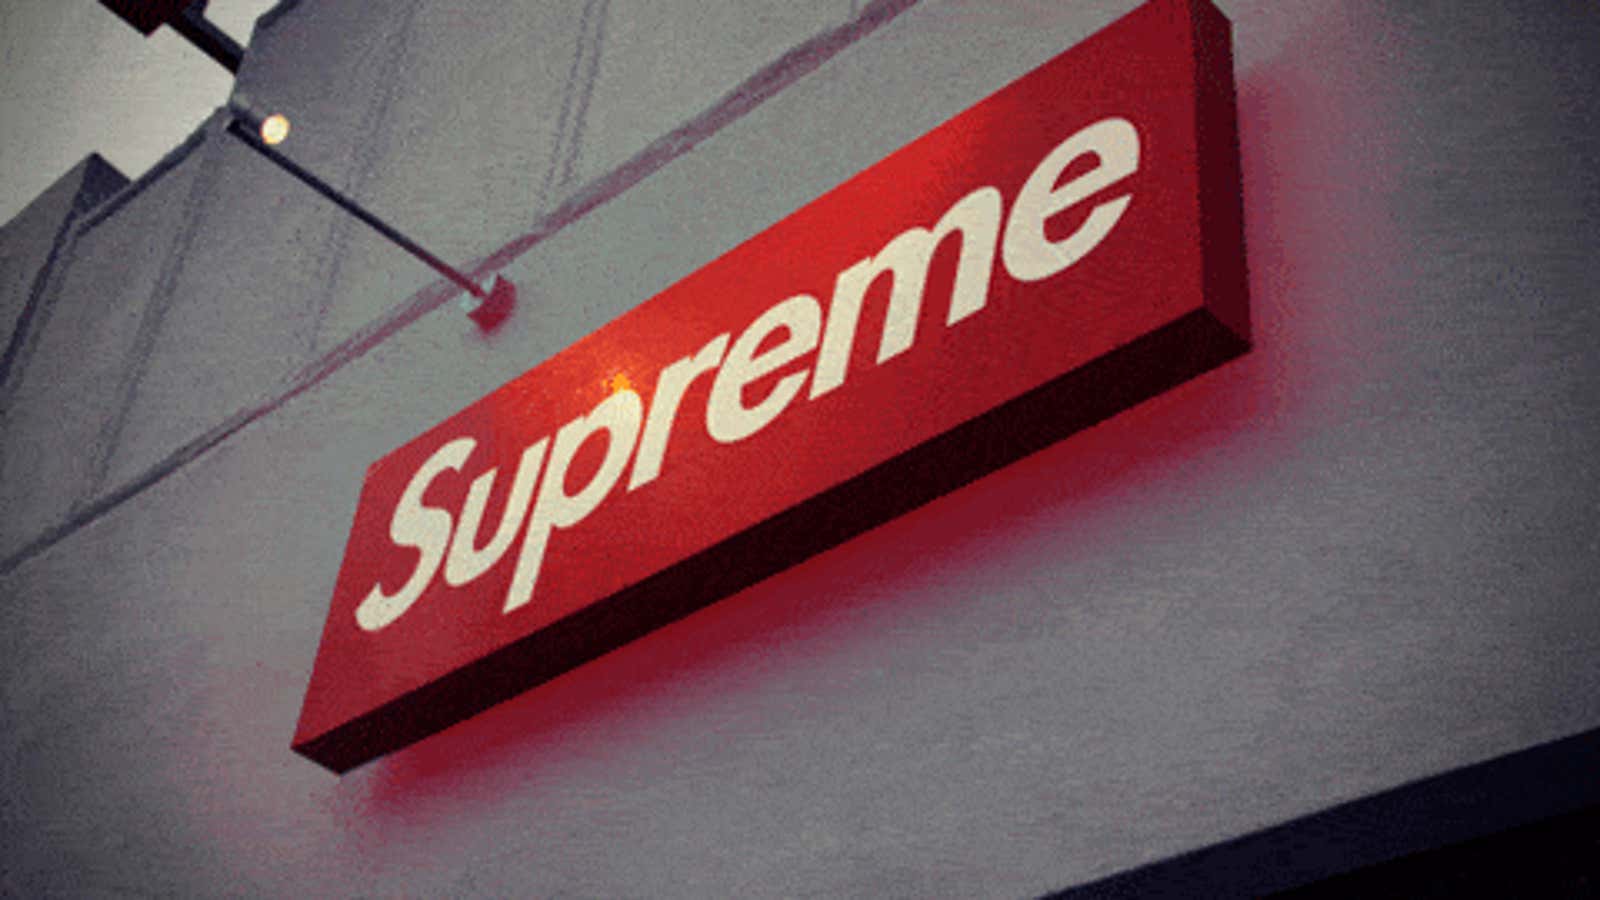 Supreme: Breaking News, Latest Collections and Brand History, Highsnobiety